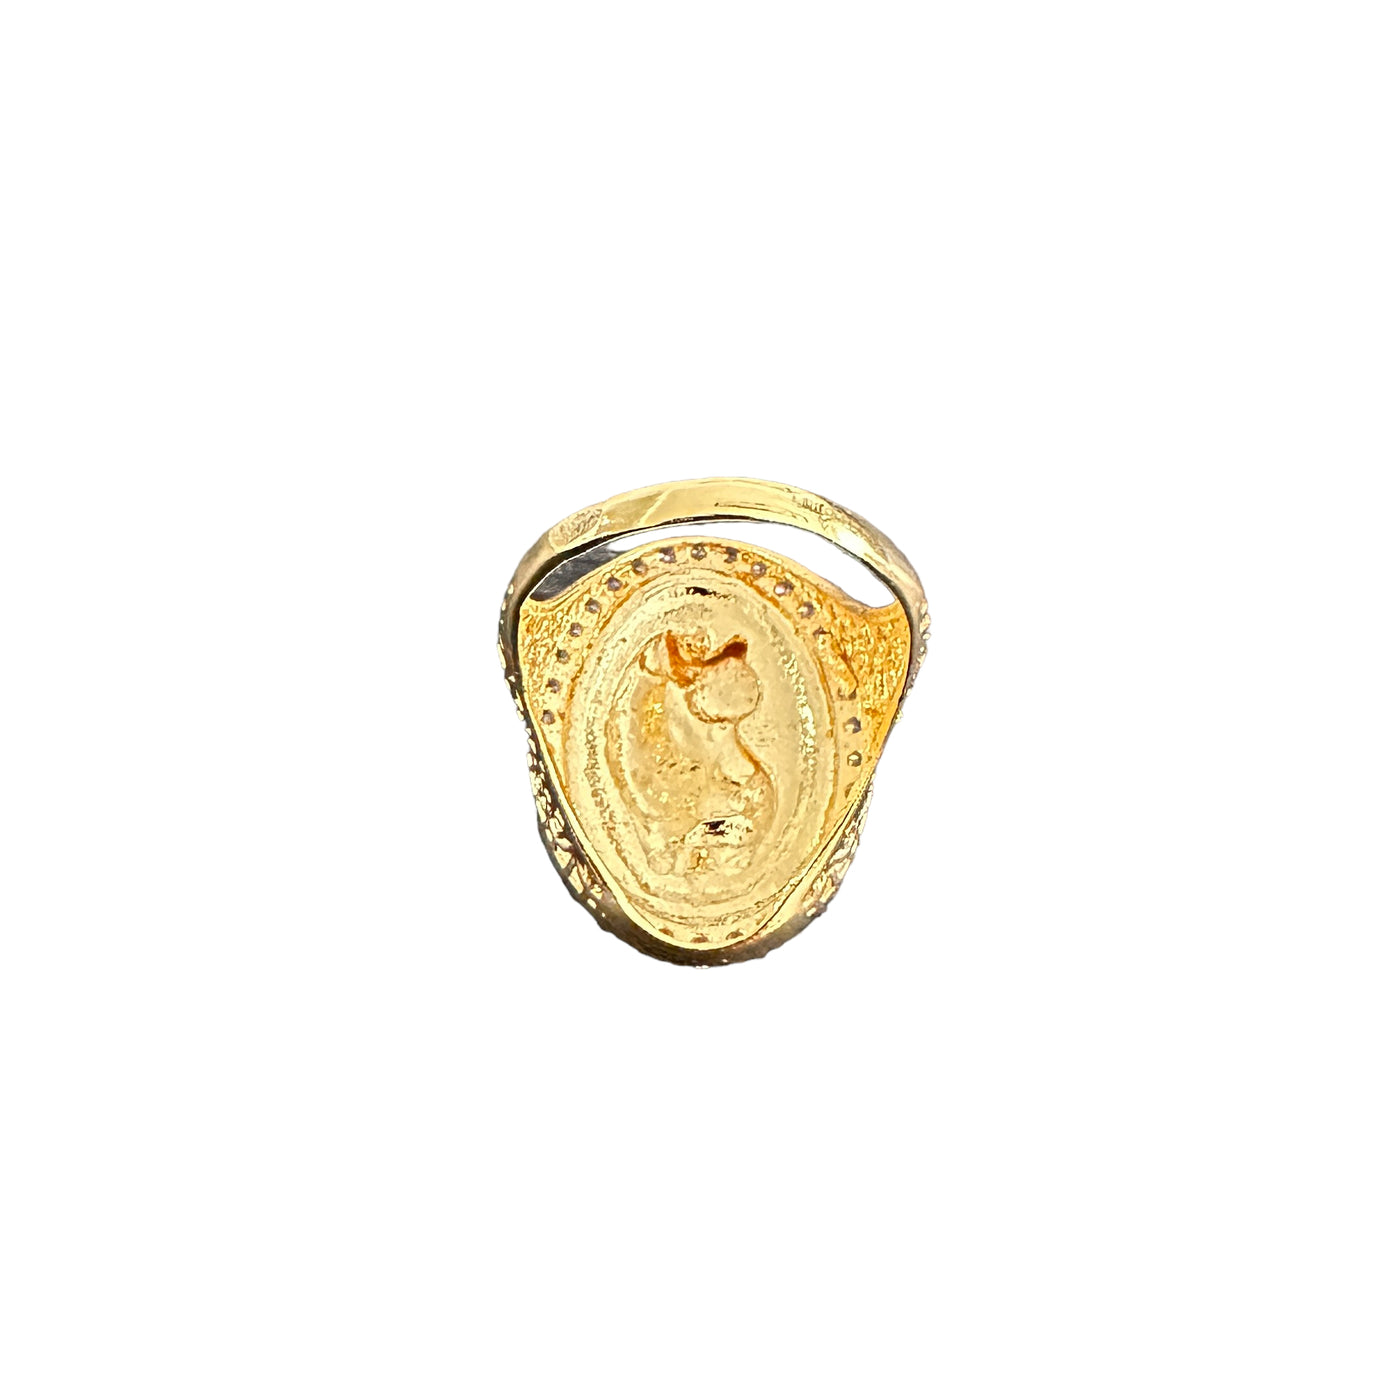 Made in Palestine Onsa Coin Replica Sterling Silver Gold Plated Ring